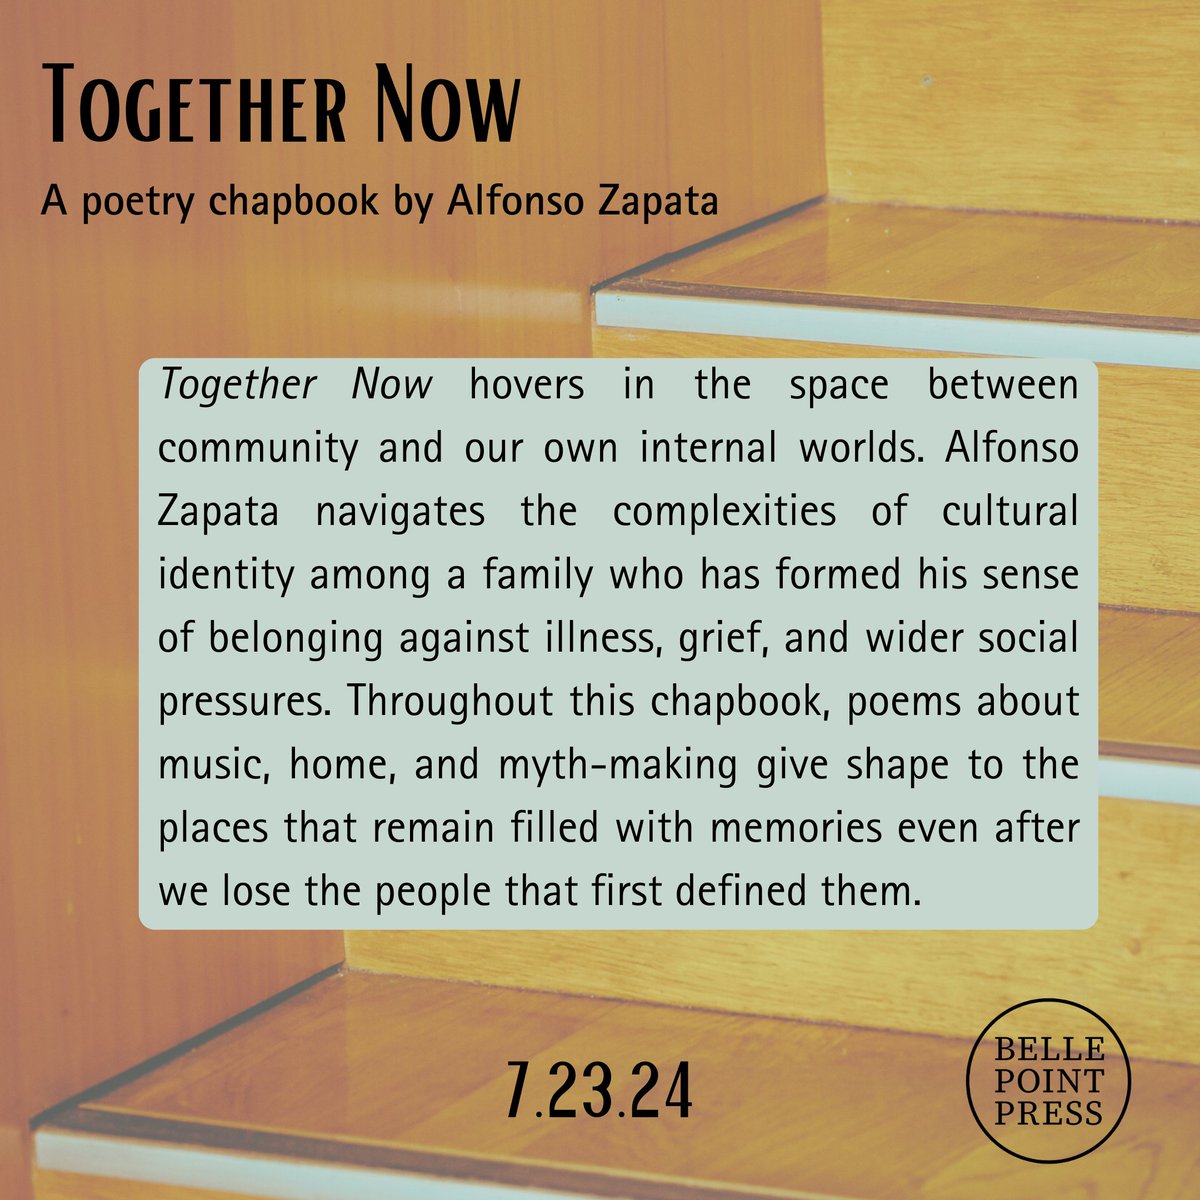 ✨COVER REVEAL✨ Introducing TOGETHER NOW, a chapbook by Kentucky poet Alfonso Zapata (@Al_Zaps)! These heartfelt poems move us every time, and we think you'll feel the same. Pre-orders are open: coming your way July 23: bellepointpress.com/products/toget…